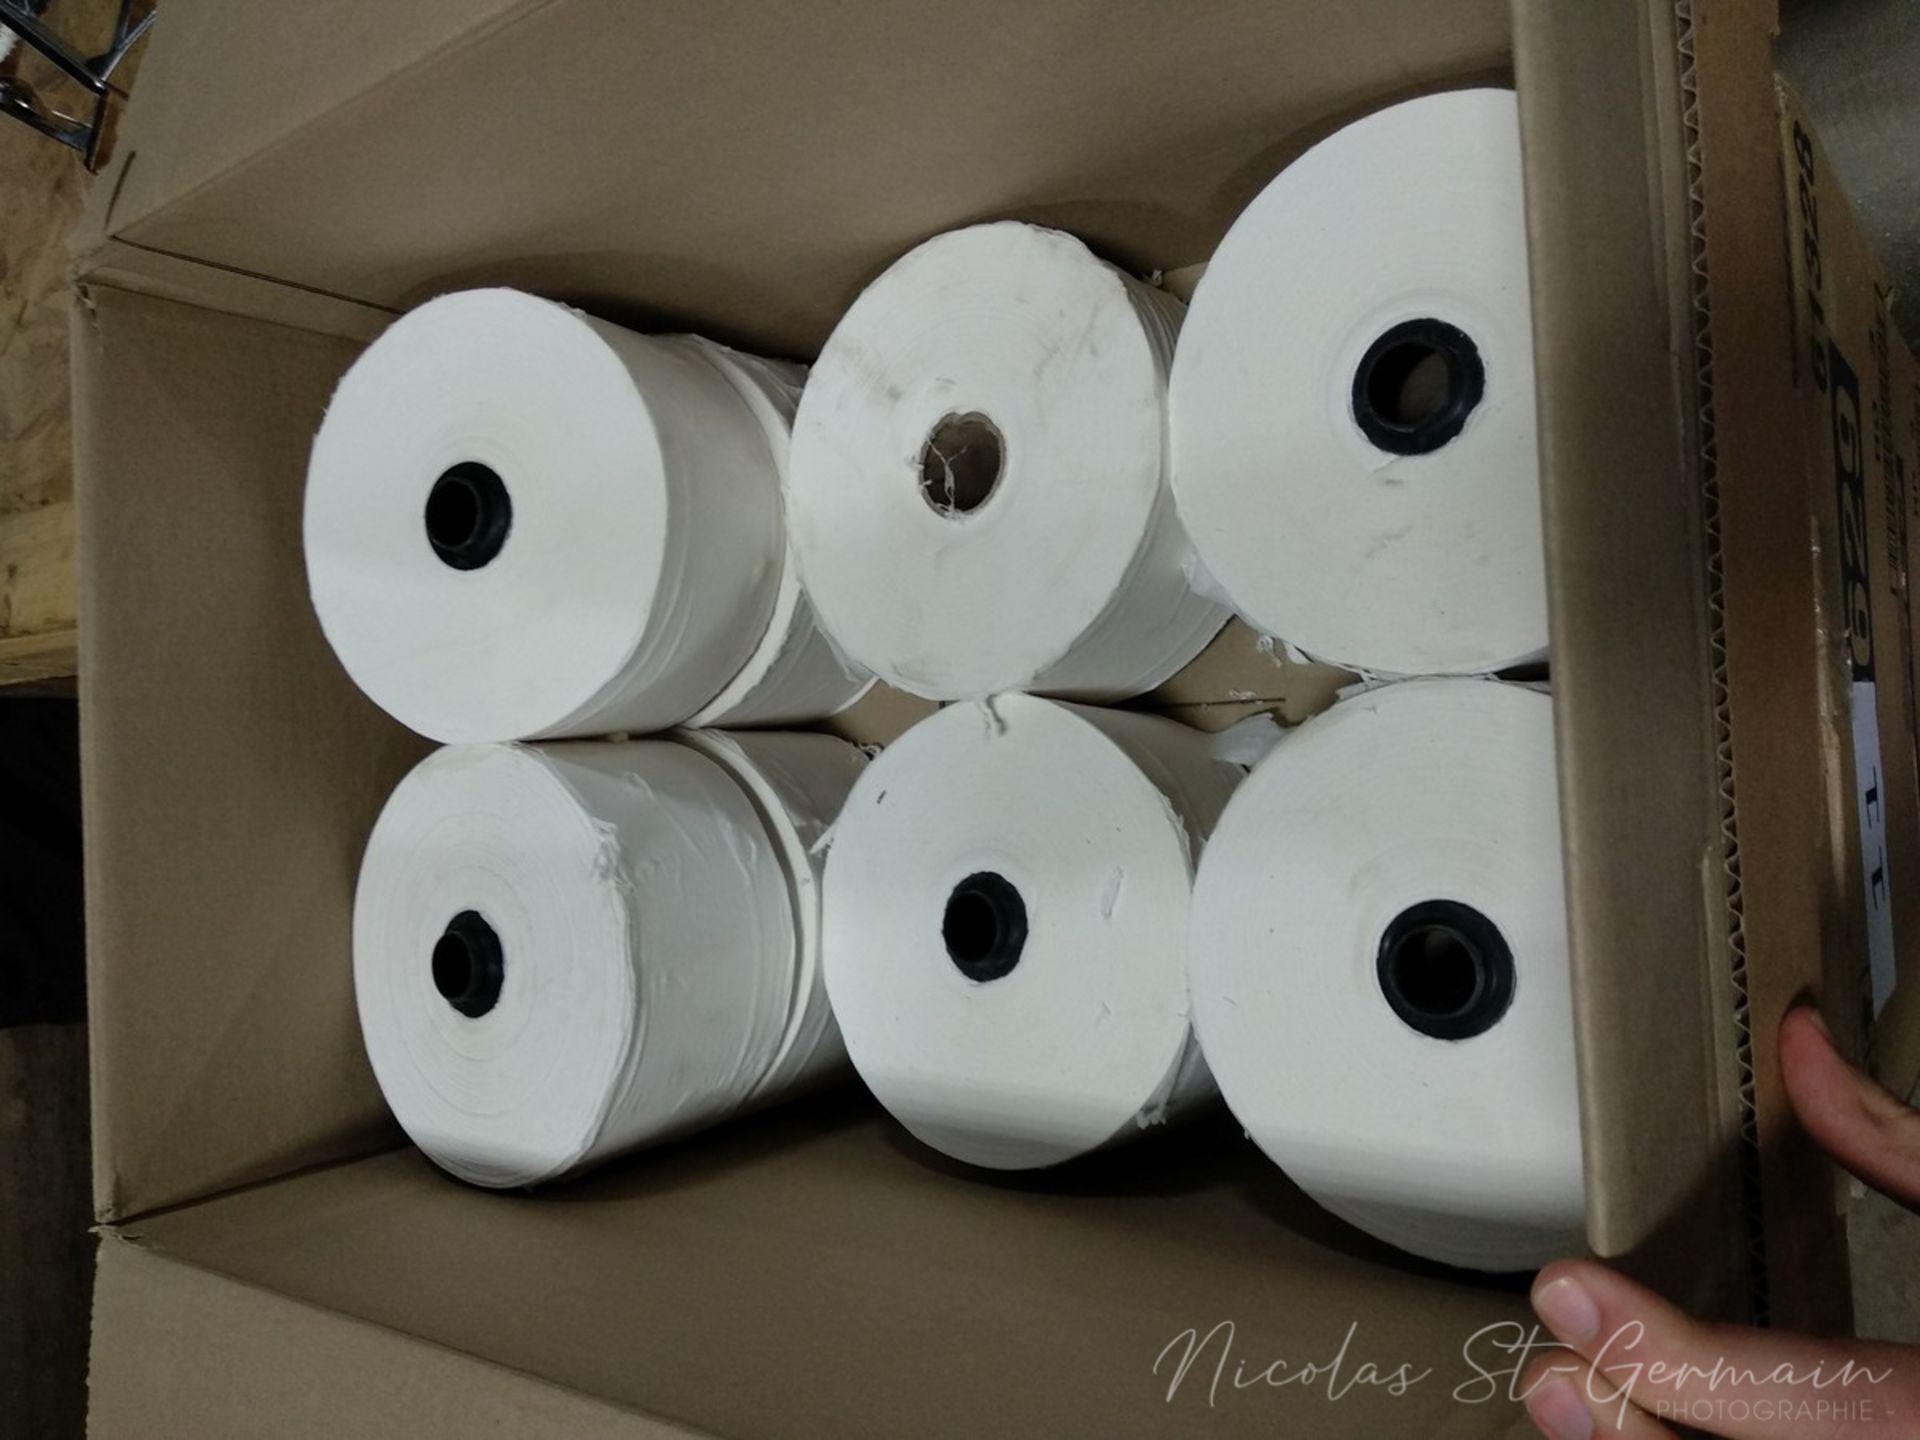 Washroom Supplies: Toilet Paper, Toilet Paper Dispensers - Image 2 of 6